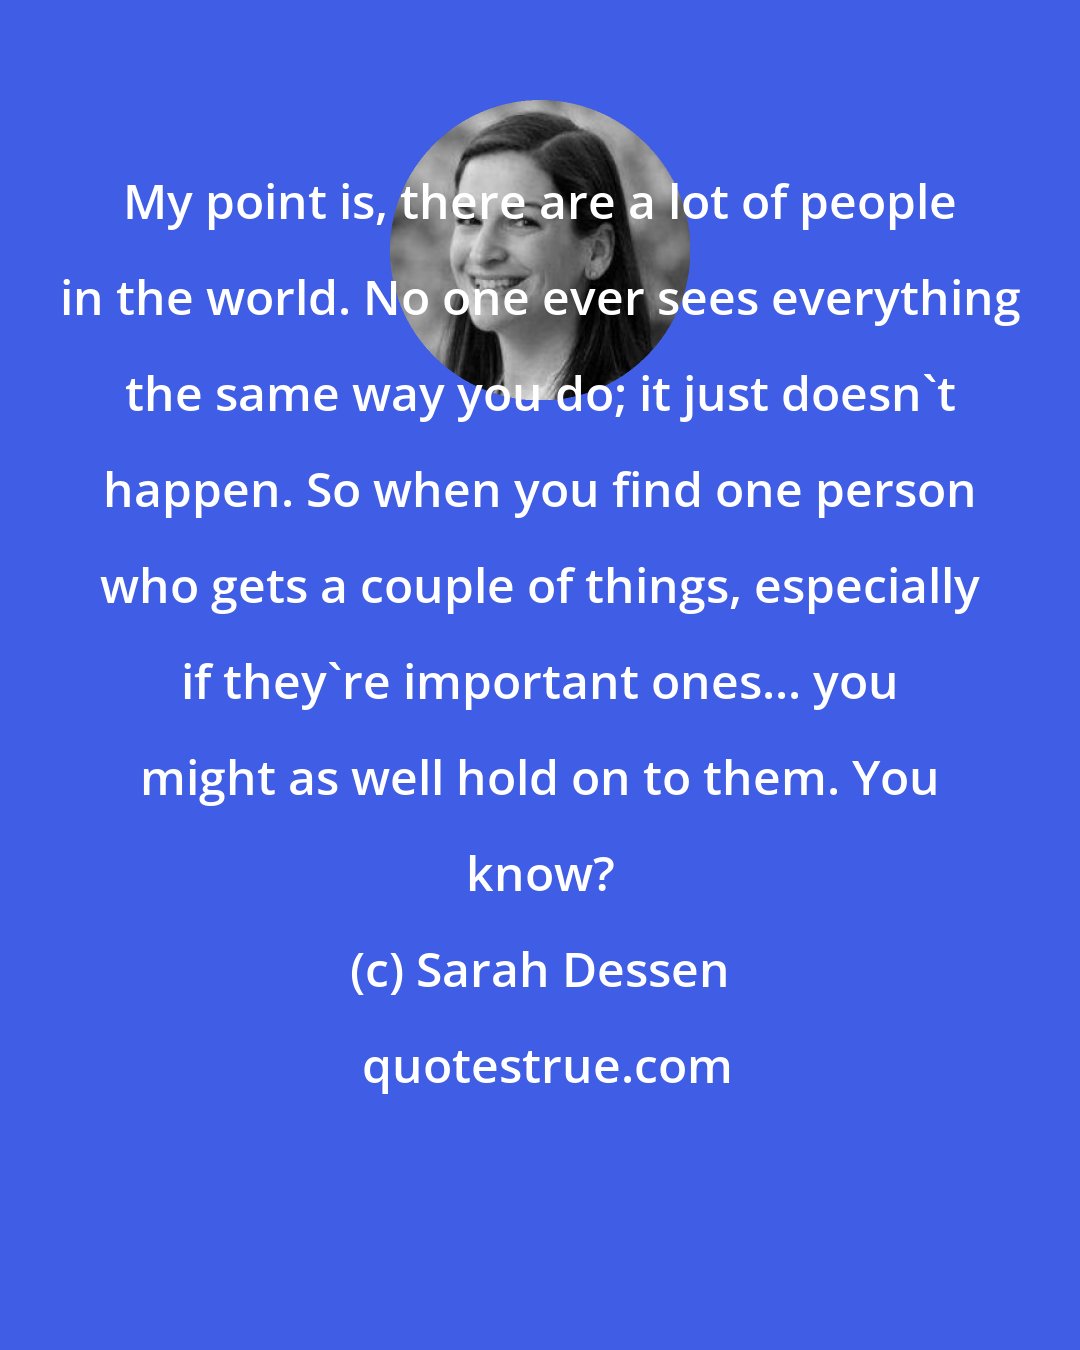 Sarah Dessen: My point is, there are a lot of people in the world. No one ever sees everything the same way you do; it just doesn't happen. So when you find one person who gets a couple of things, especially if they're important ones... you might as well hold on to them. You know?